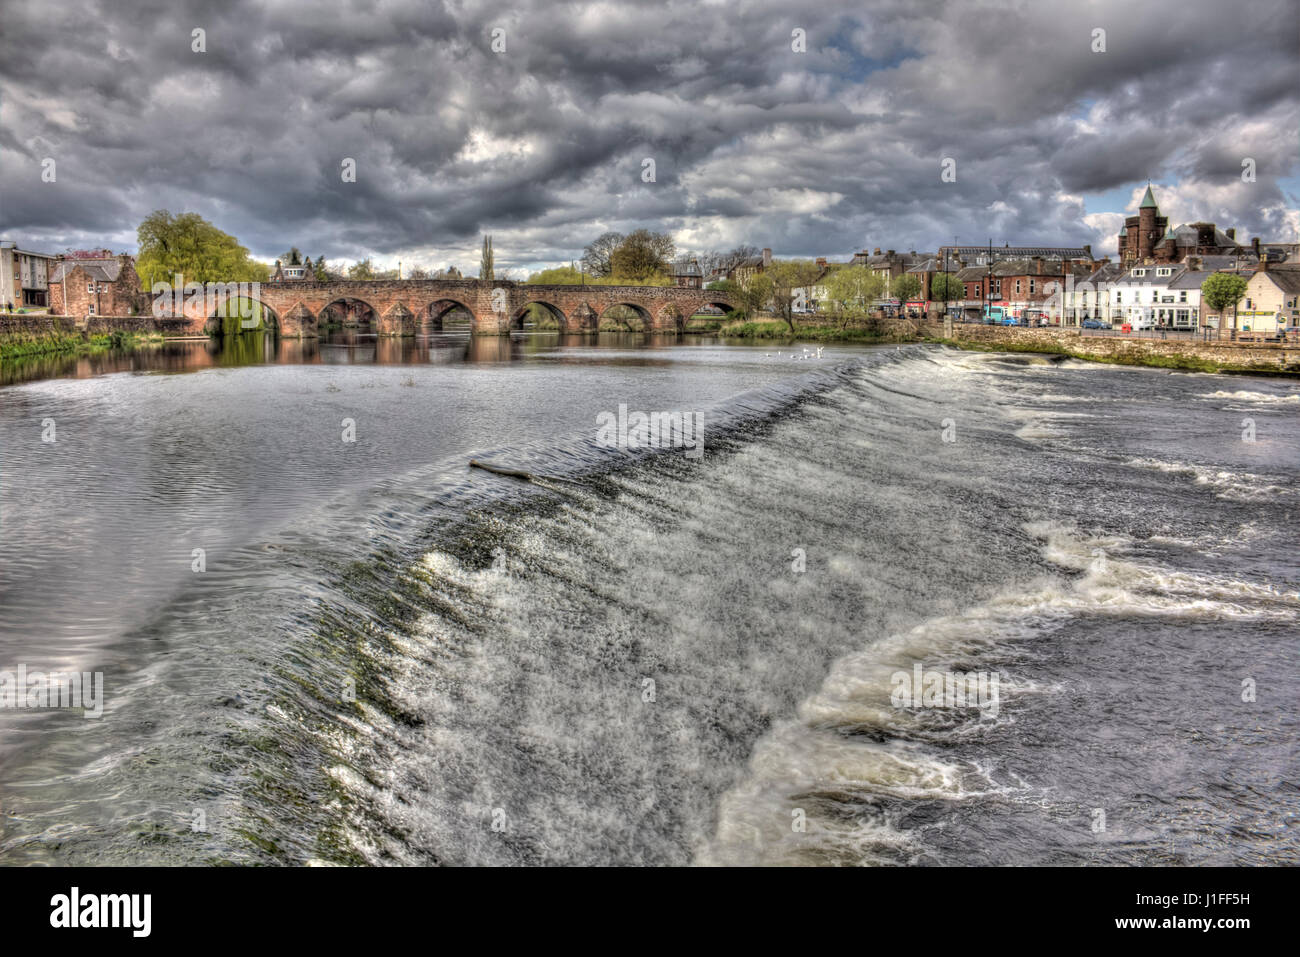 HIgh Dynamic Range image of Devorgilla Bridge and The Caul (local name for the weir), Dumfries. The turrets of the Sherriff Court are visible in back. Stock Photo